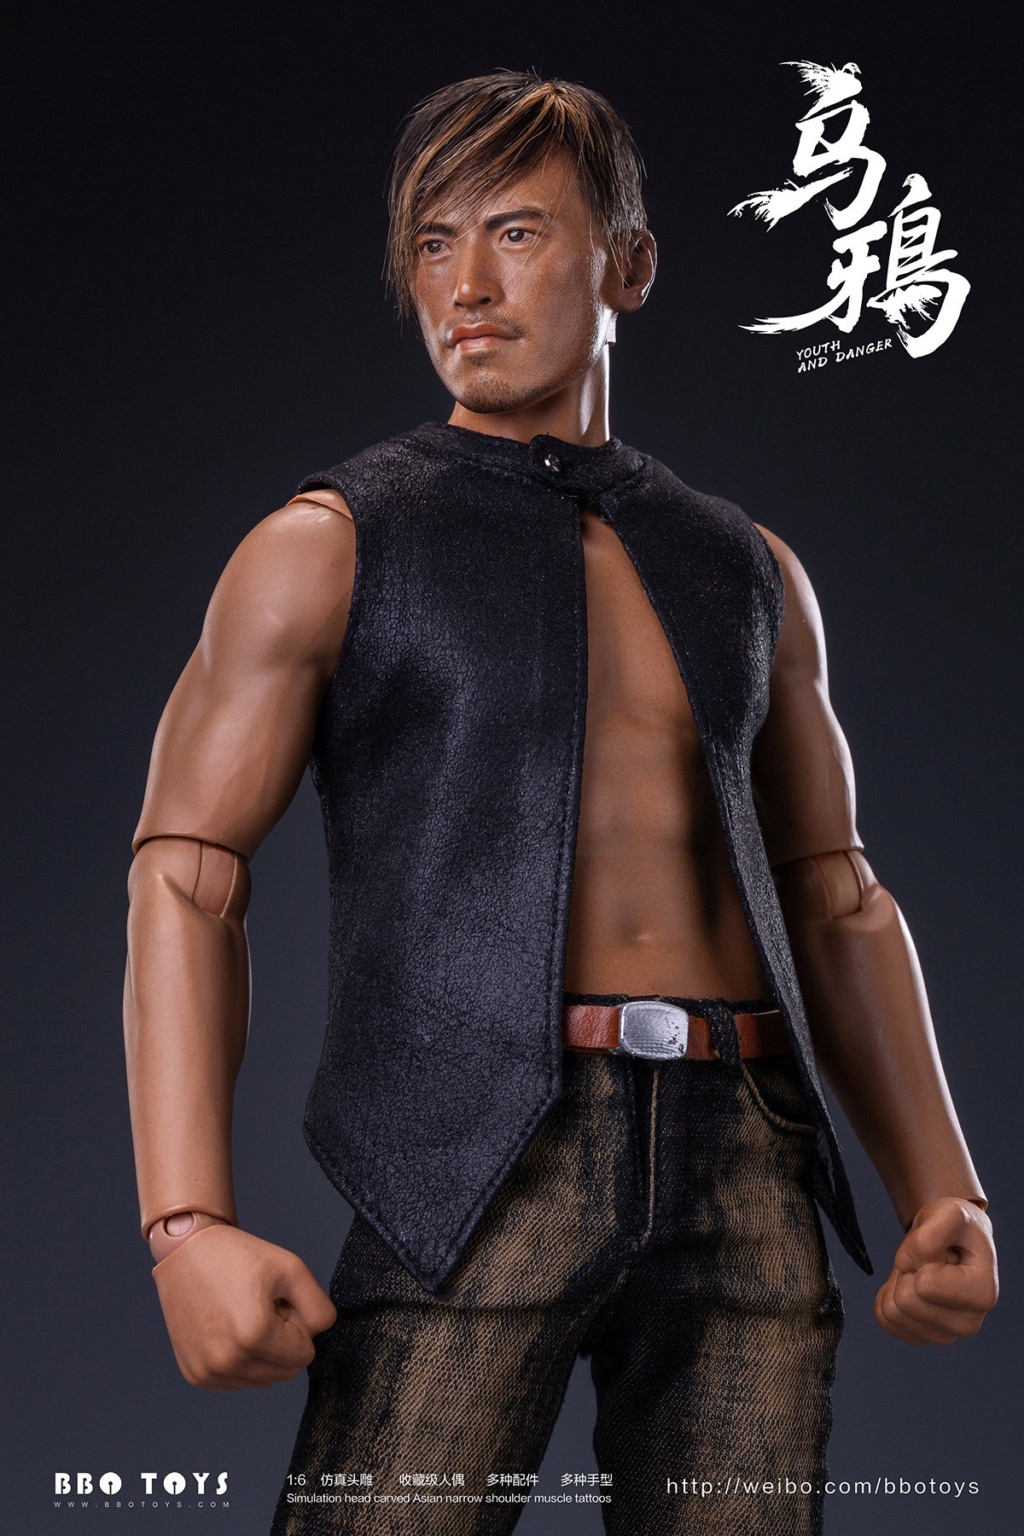 Asian - NEW PRODUCT: BBOTOYS: 1/6 Ancient and mysterious series Crow Glory GHZ004 5338e010